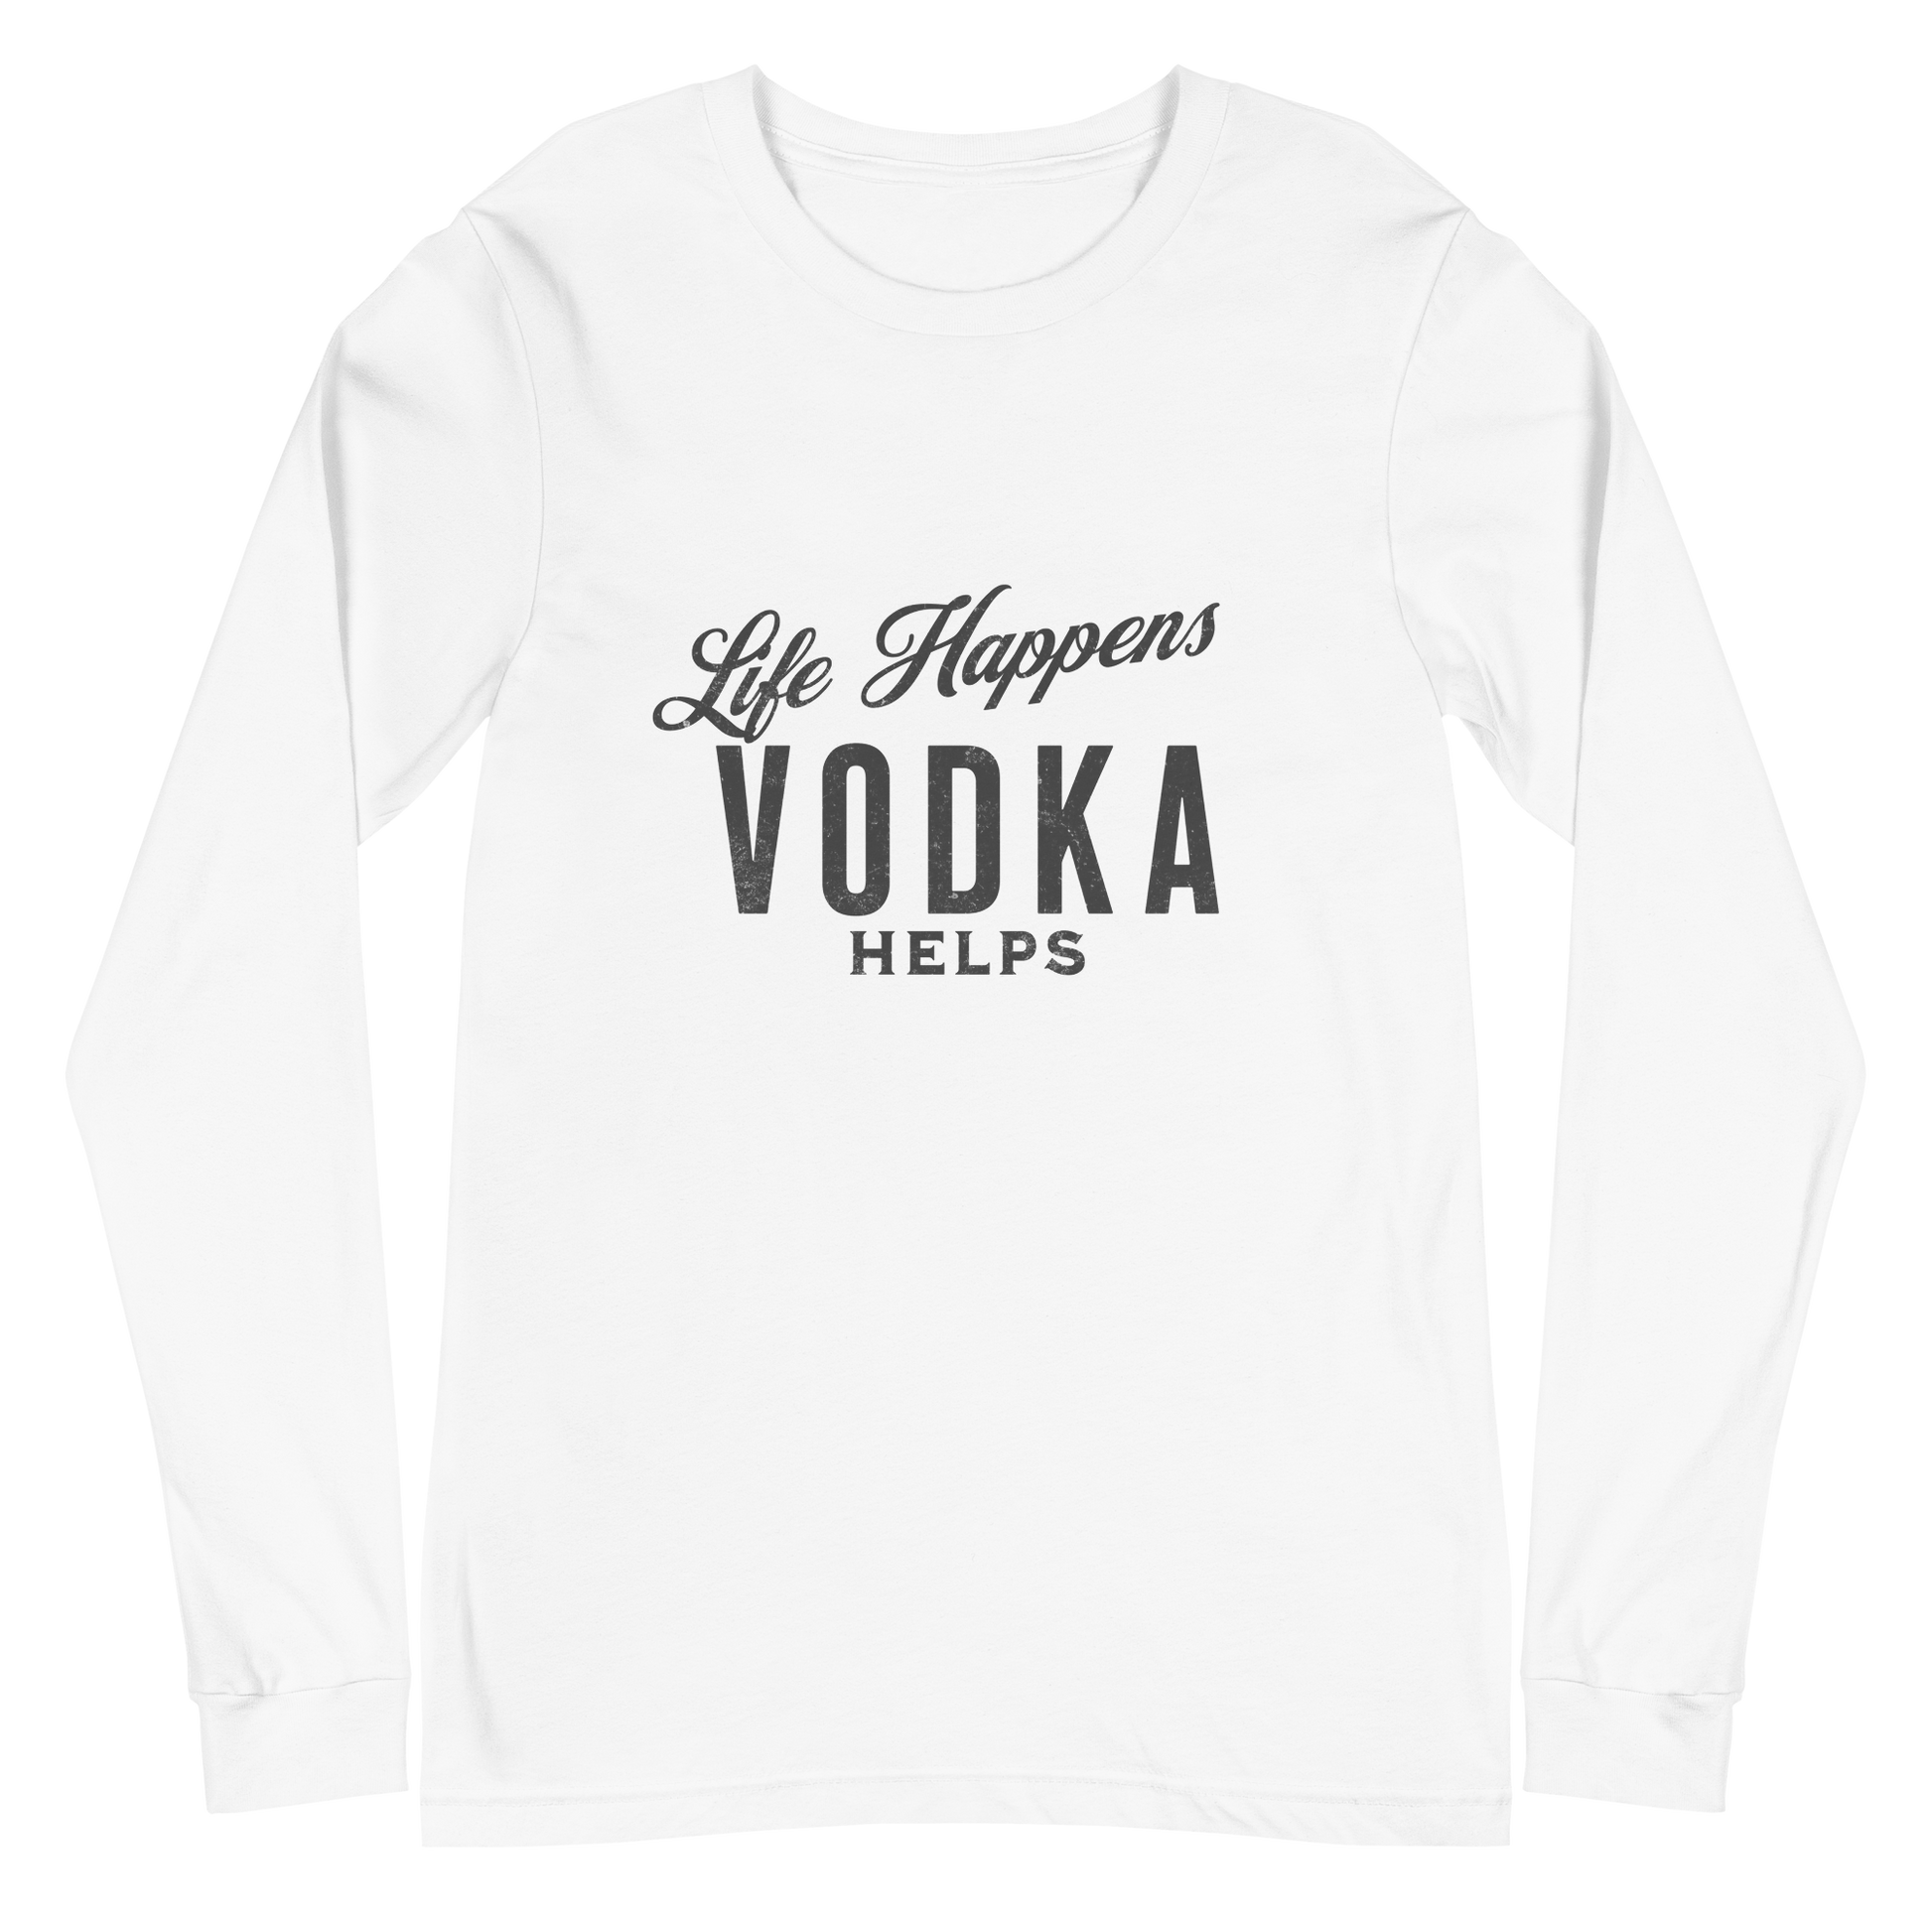 Life Happens Vodka Helps Tee: Ultimate Funny Drinking Shirt MENS,New,UNISEX,WOMENS Dayzzed Apparel